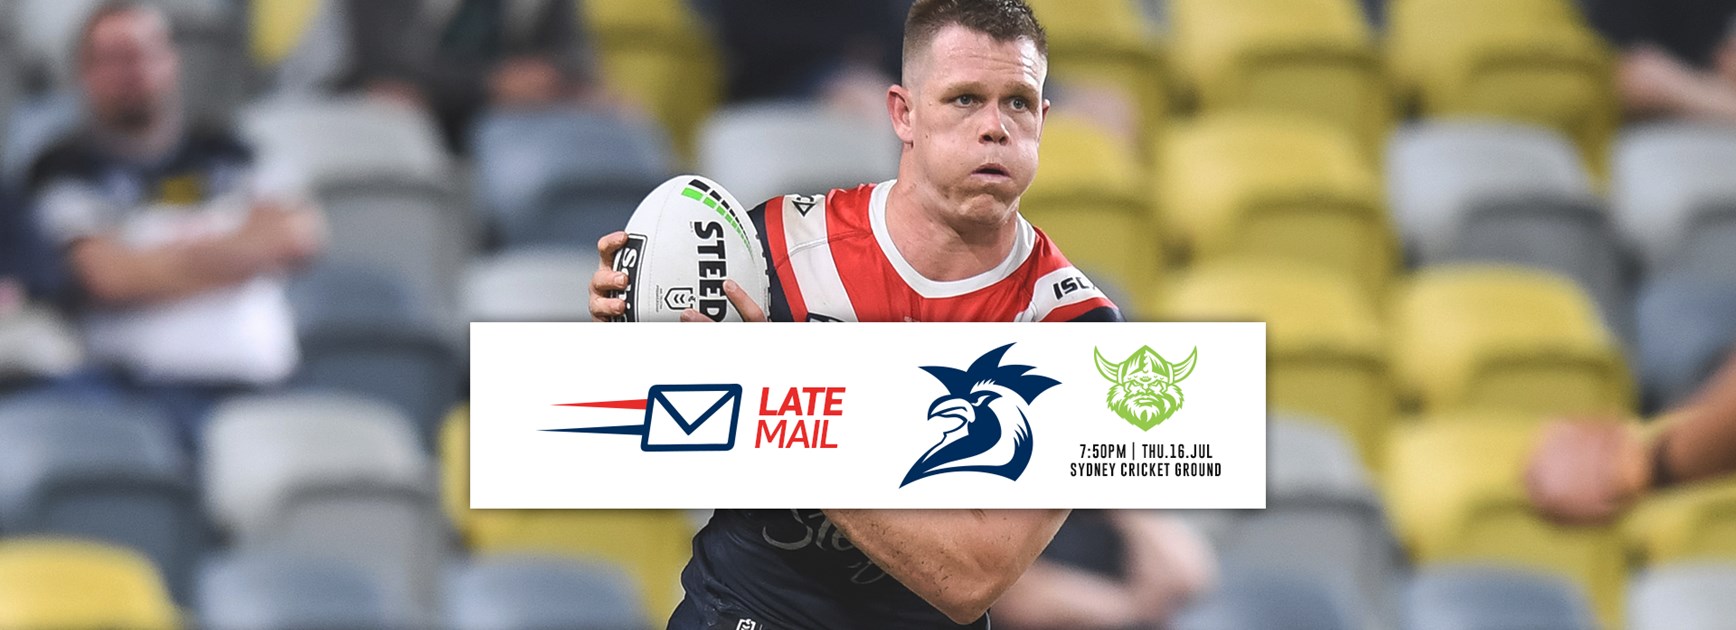 Late Mail | Collins Starts